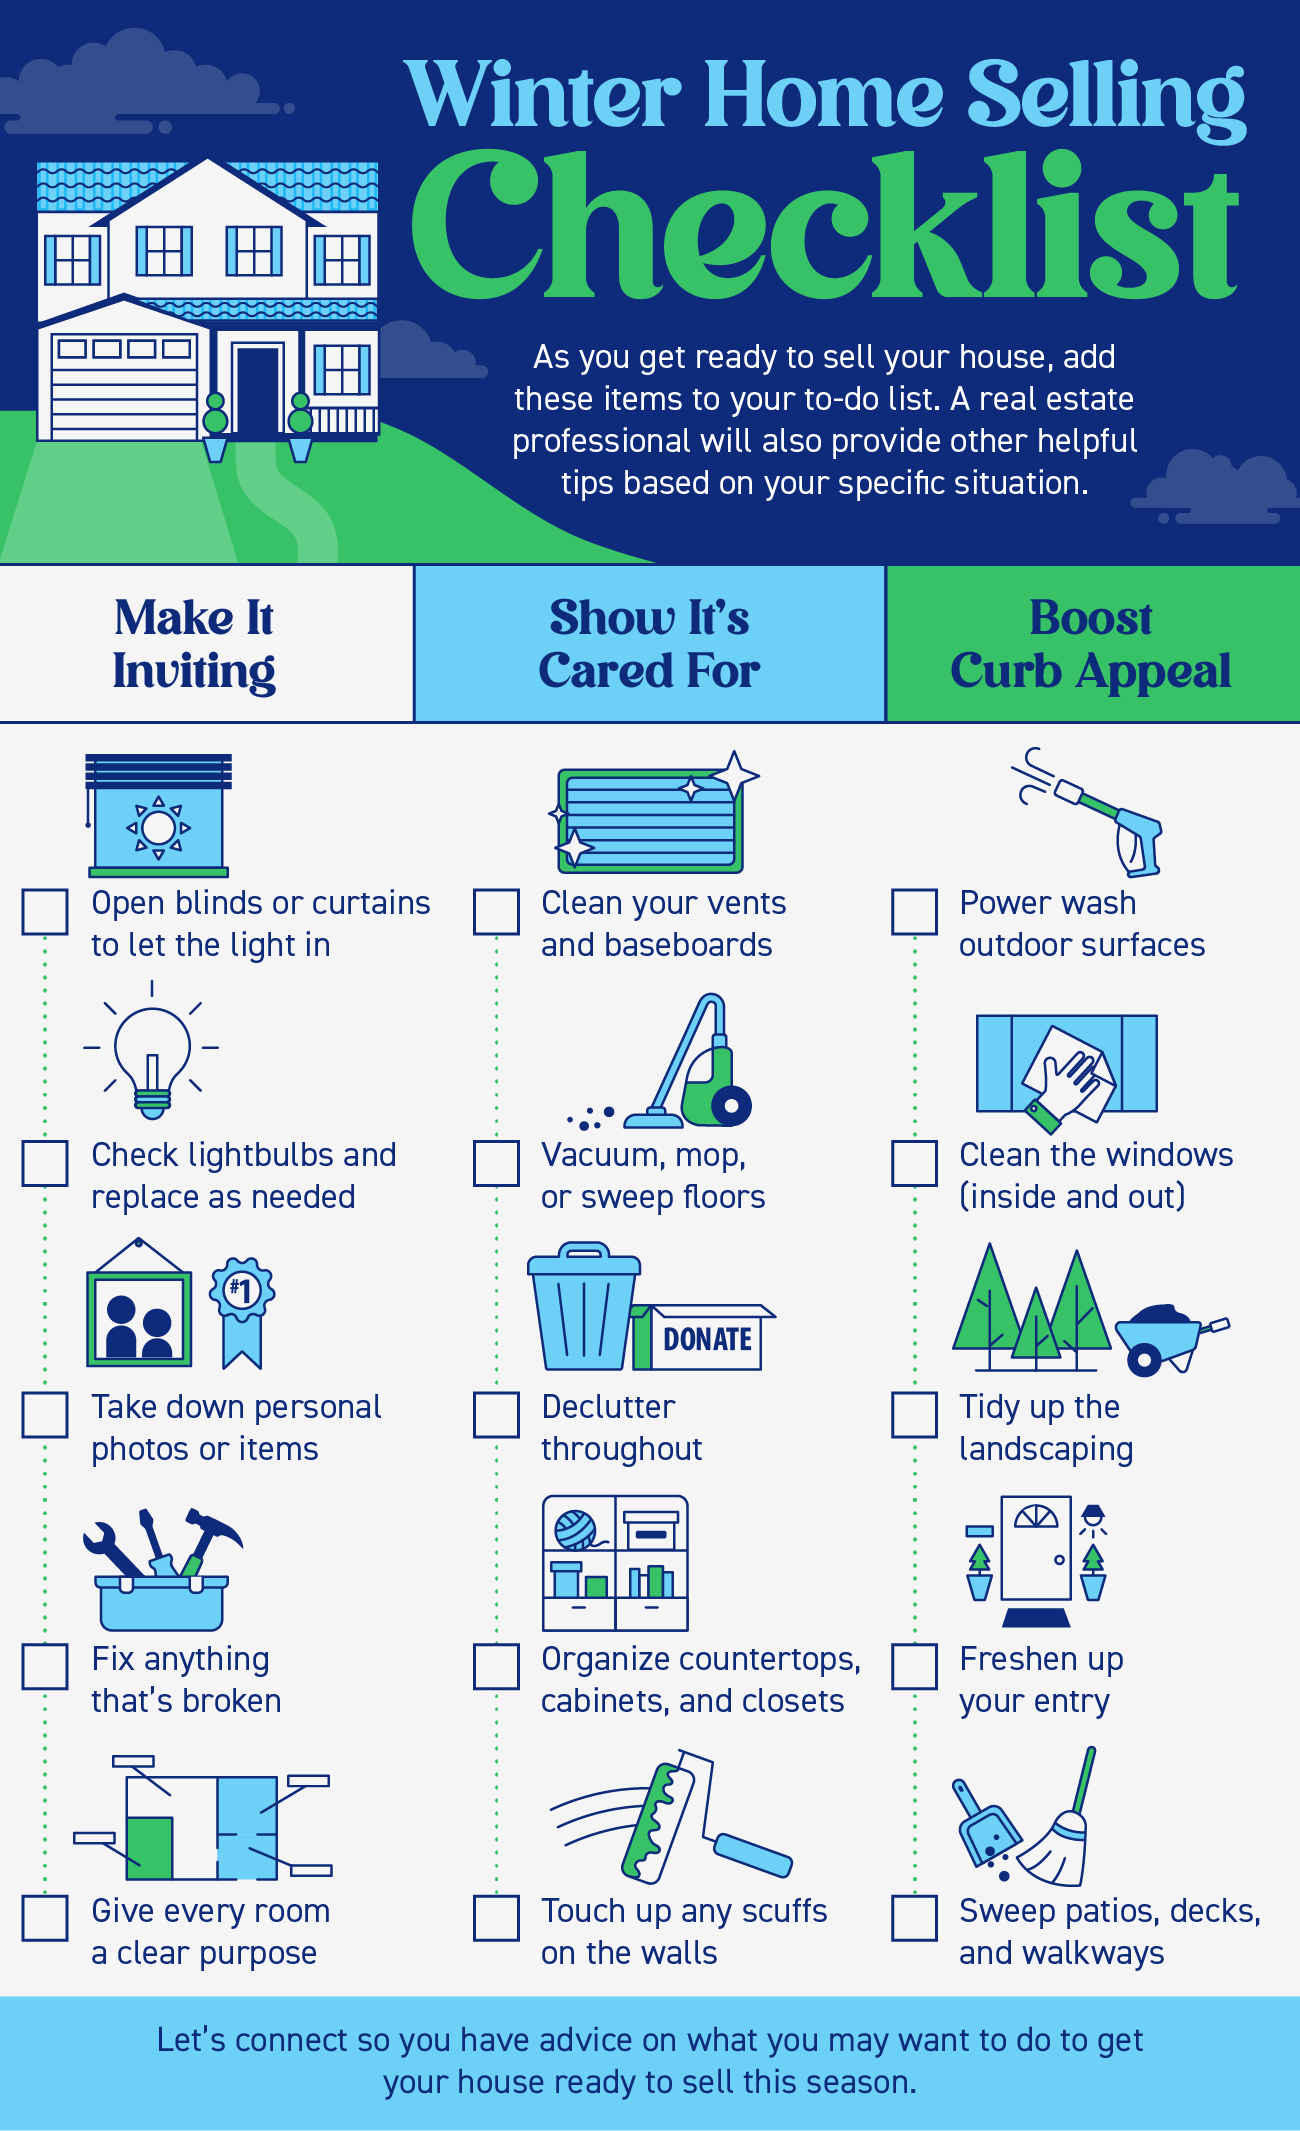 Winter Home Selling Checklist [INFOGRAPHIC] | Simplifying The Market